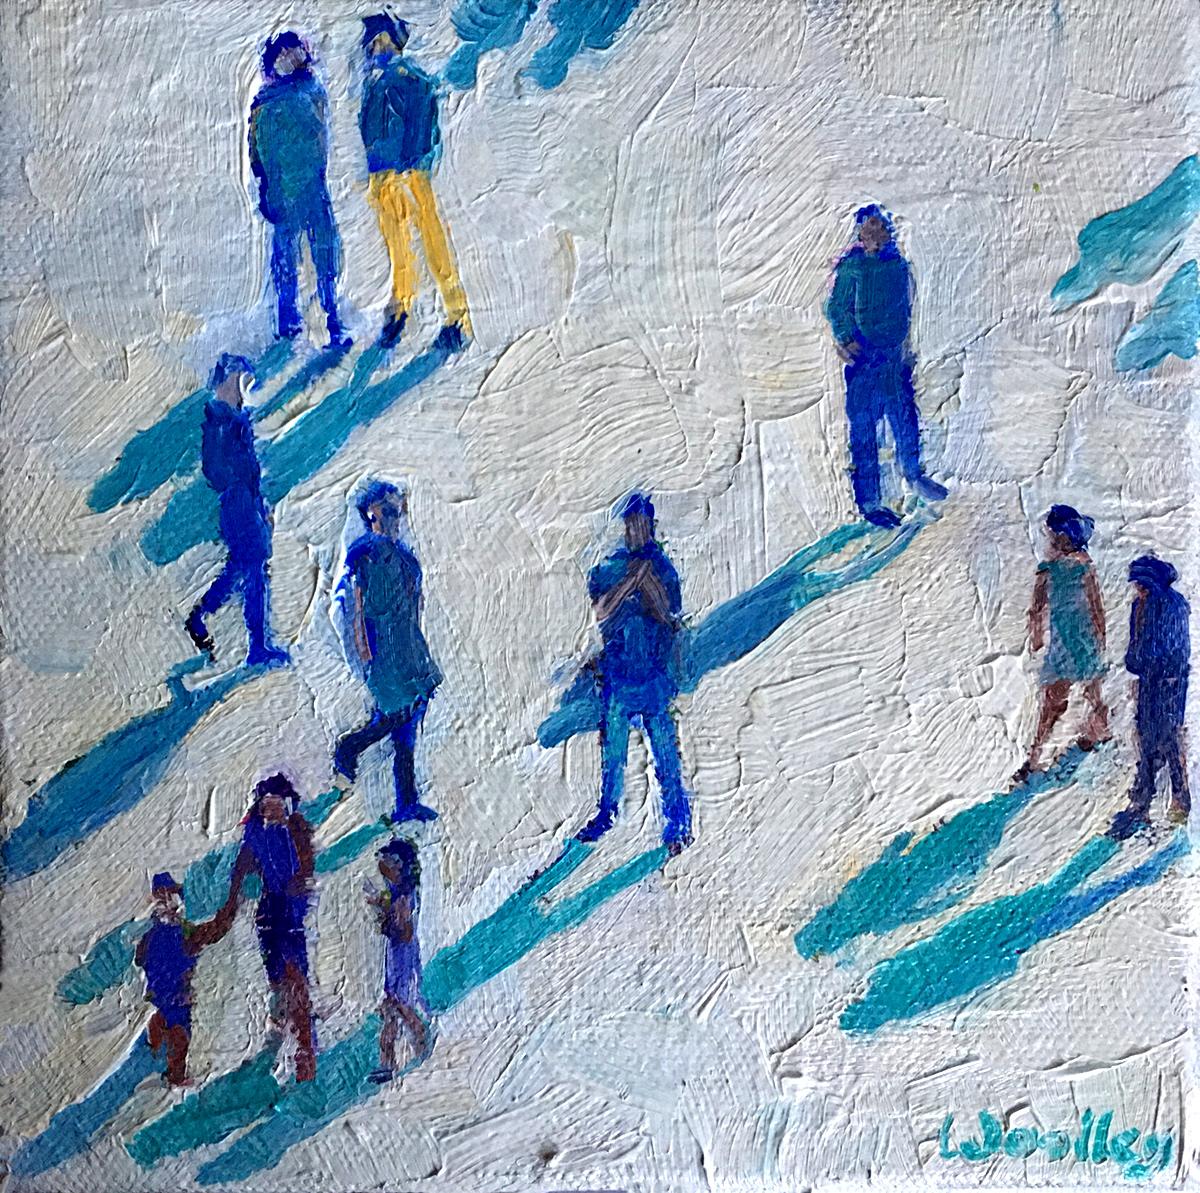 Eleanor Woolley  Interior Painting - Blue Shadows, Original Painting, Figurative, Blue winter art, Oil on canvas